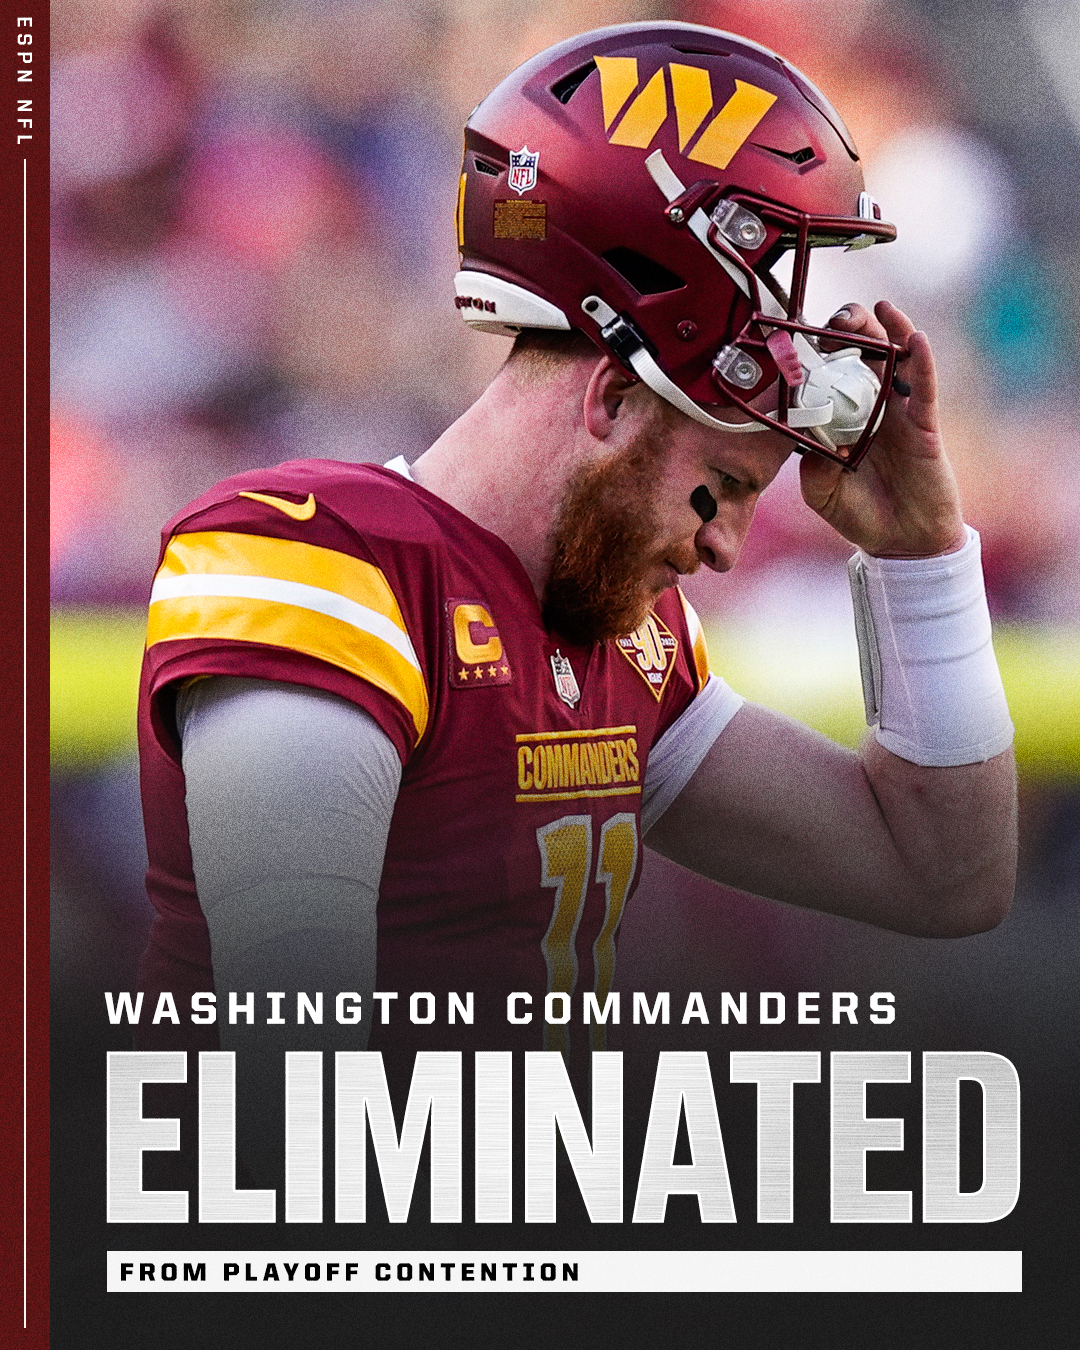 NFL on ESPN on X: 'The Commanders have been eliminated from